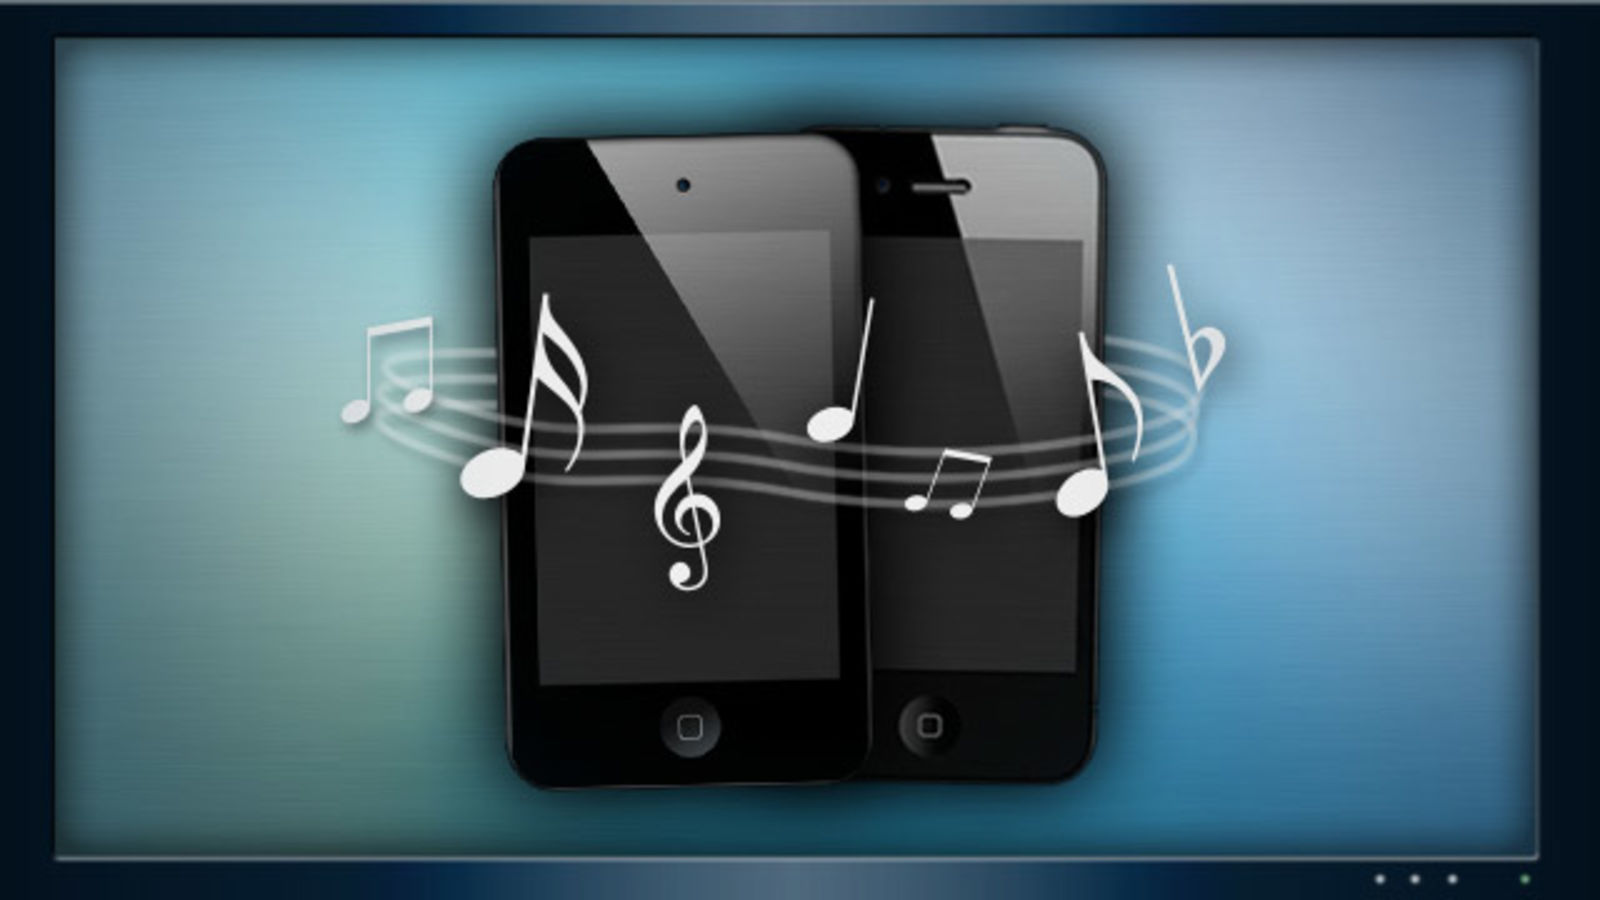 Free App To Copy Music From Ipod To Mac